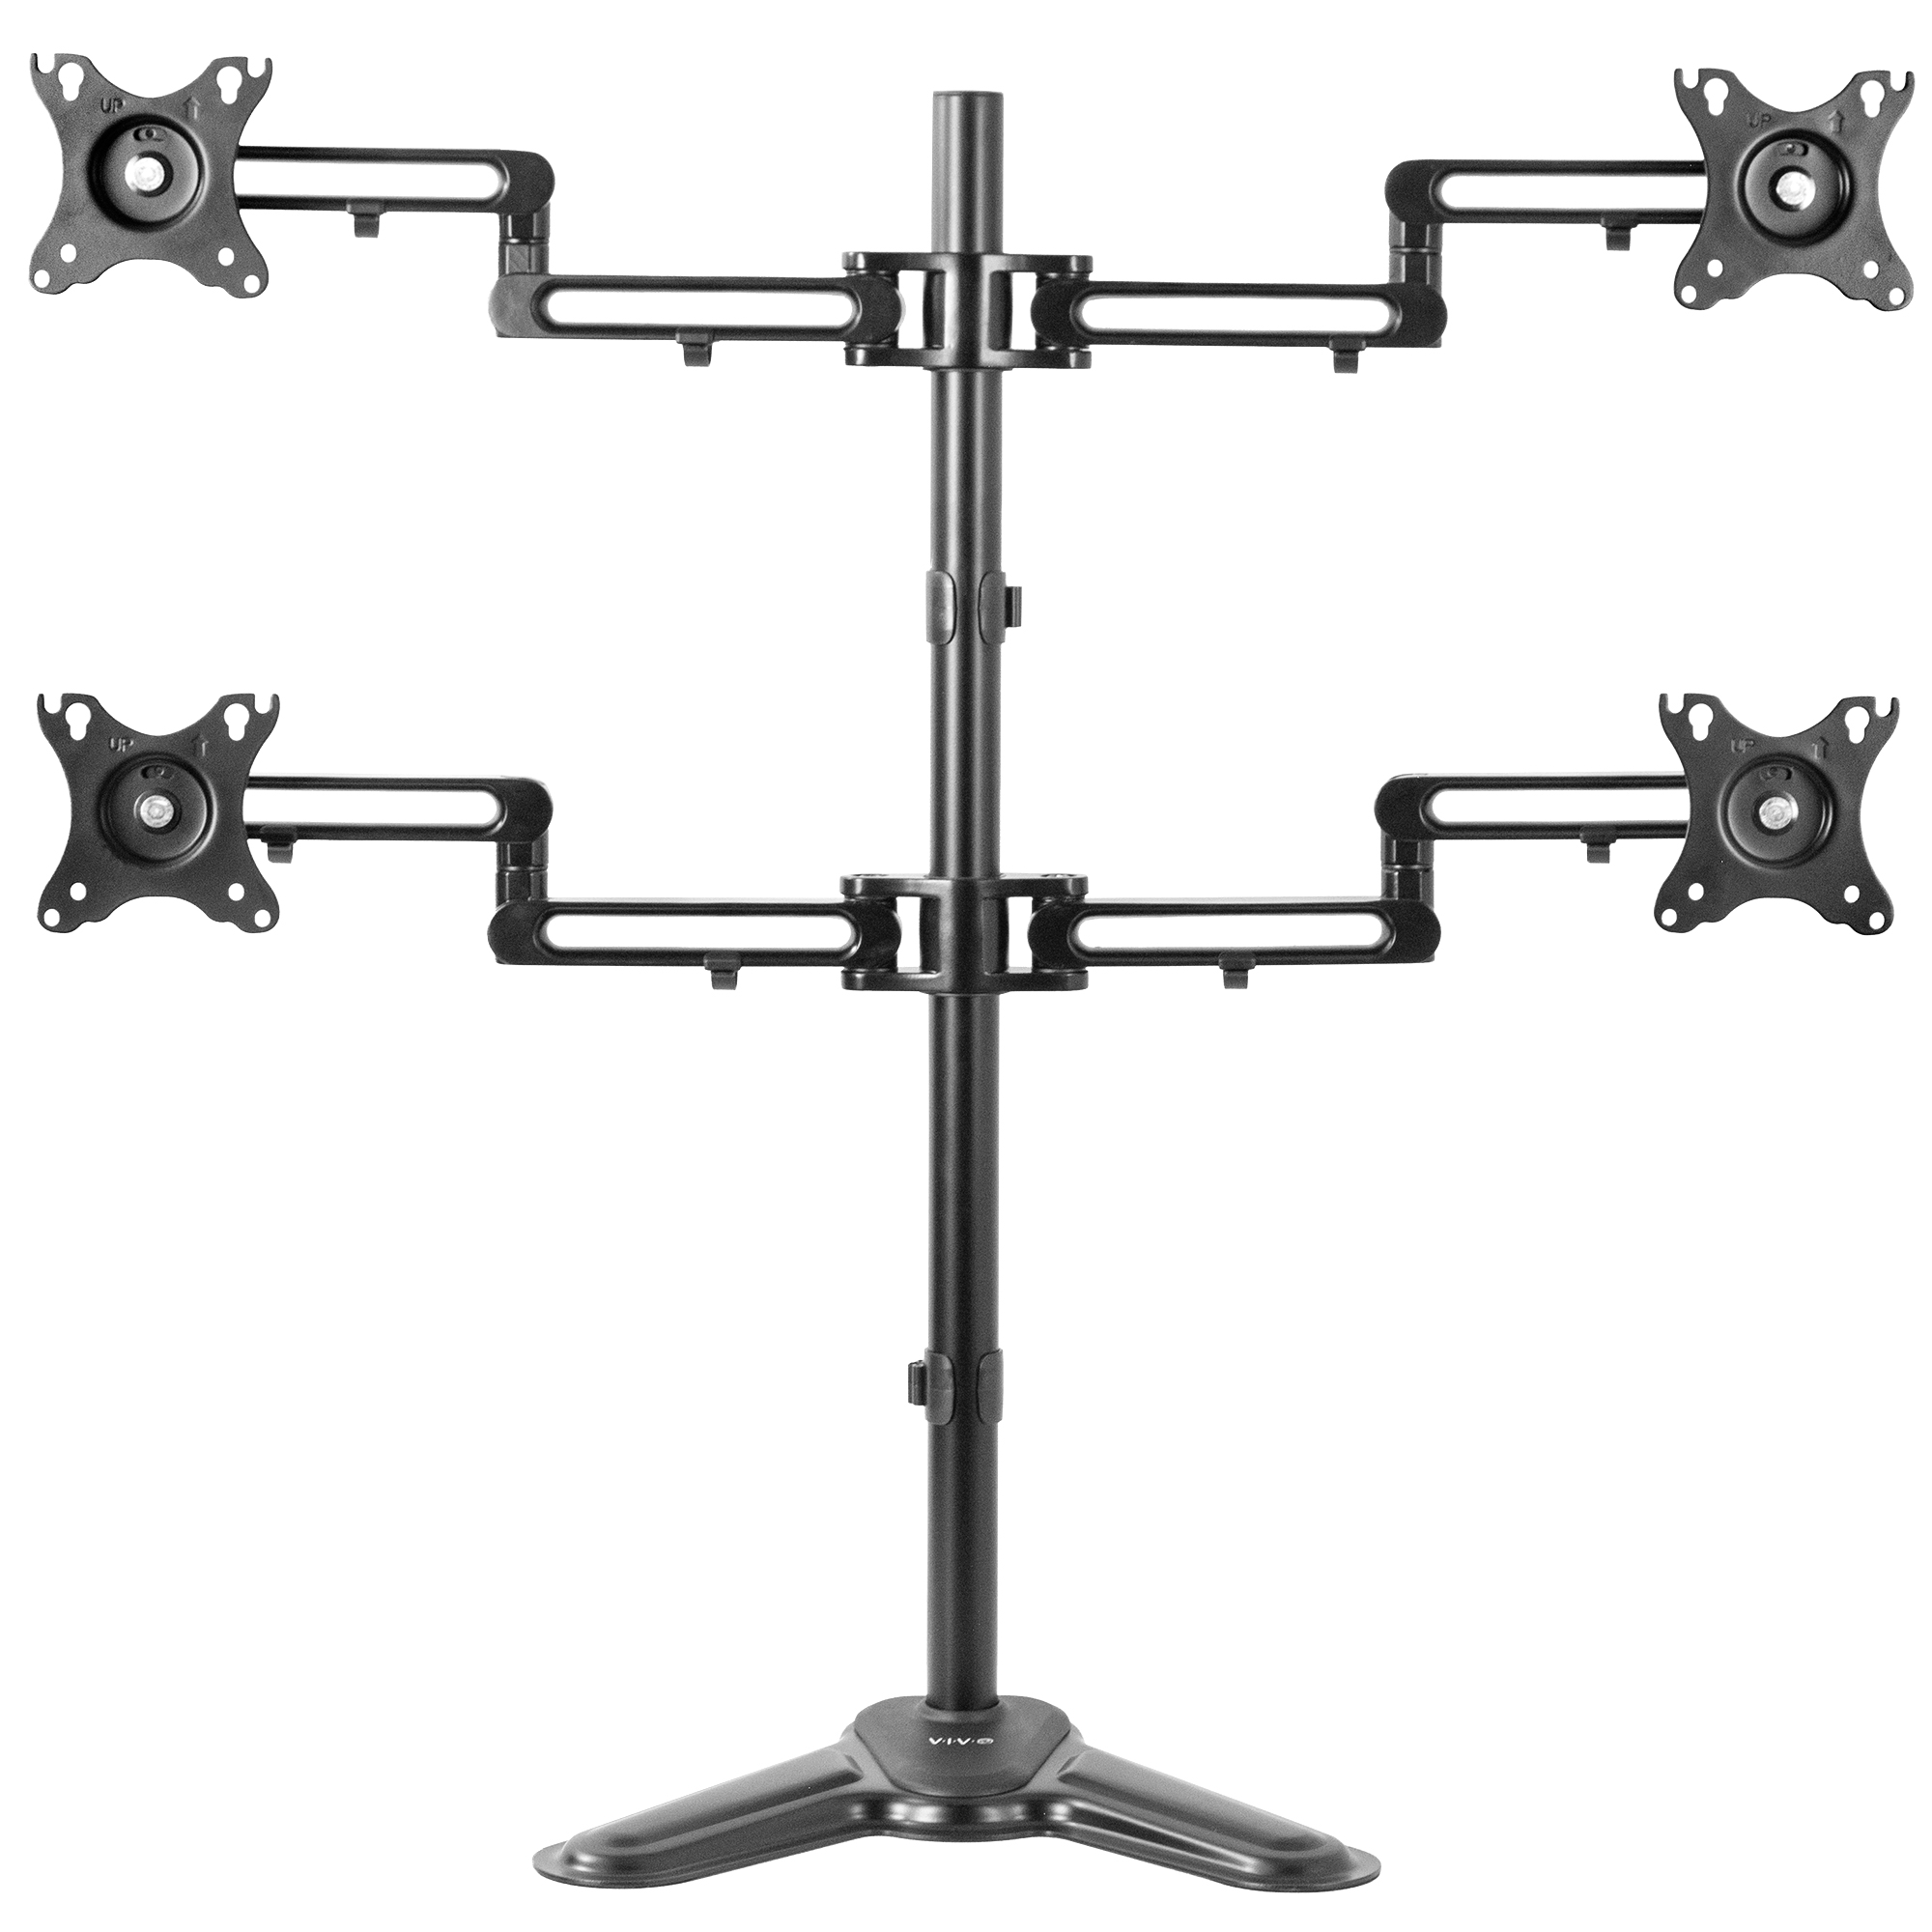 Quad Lcd Monitor Mount Fully Adjustable Desk Stand For 4 Screens